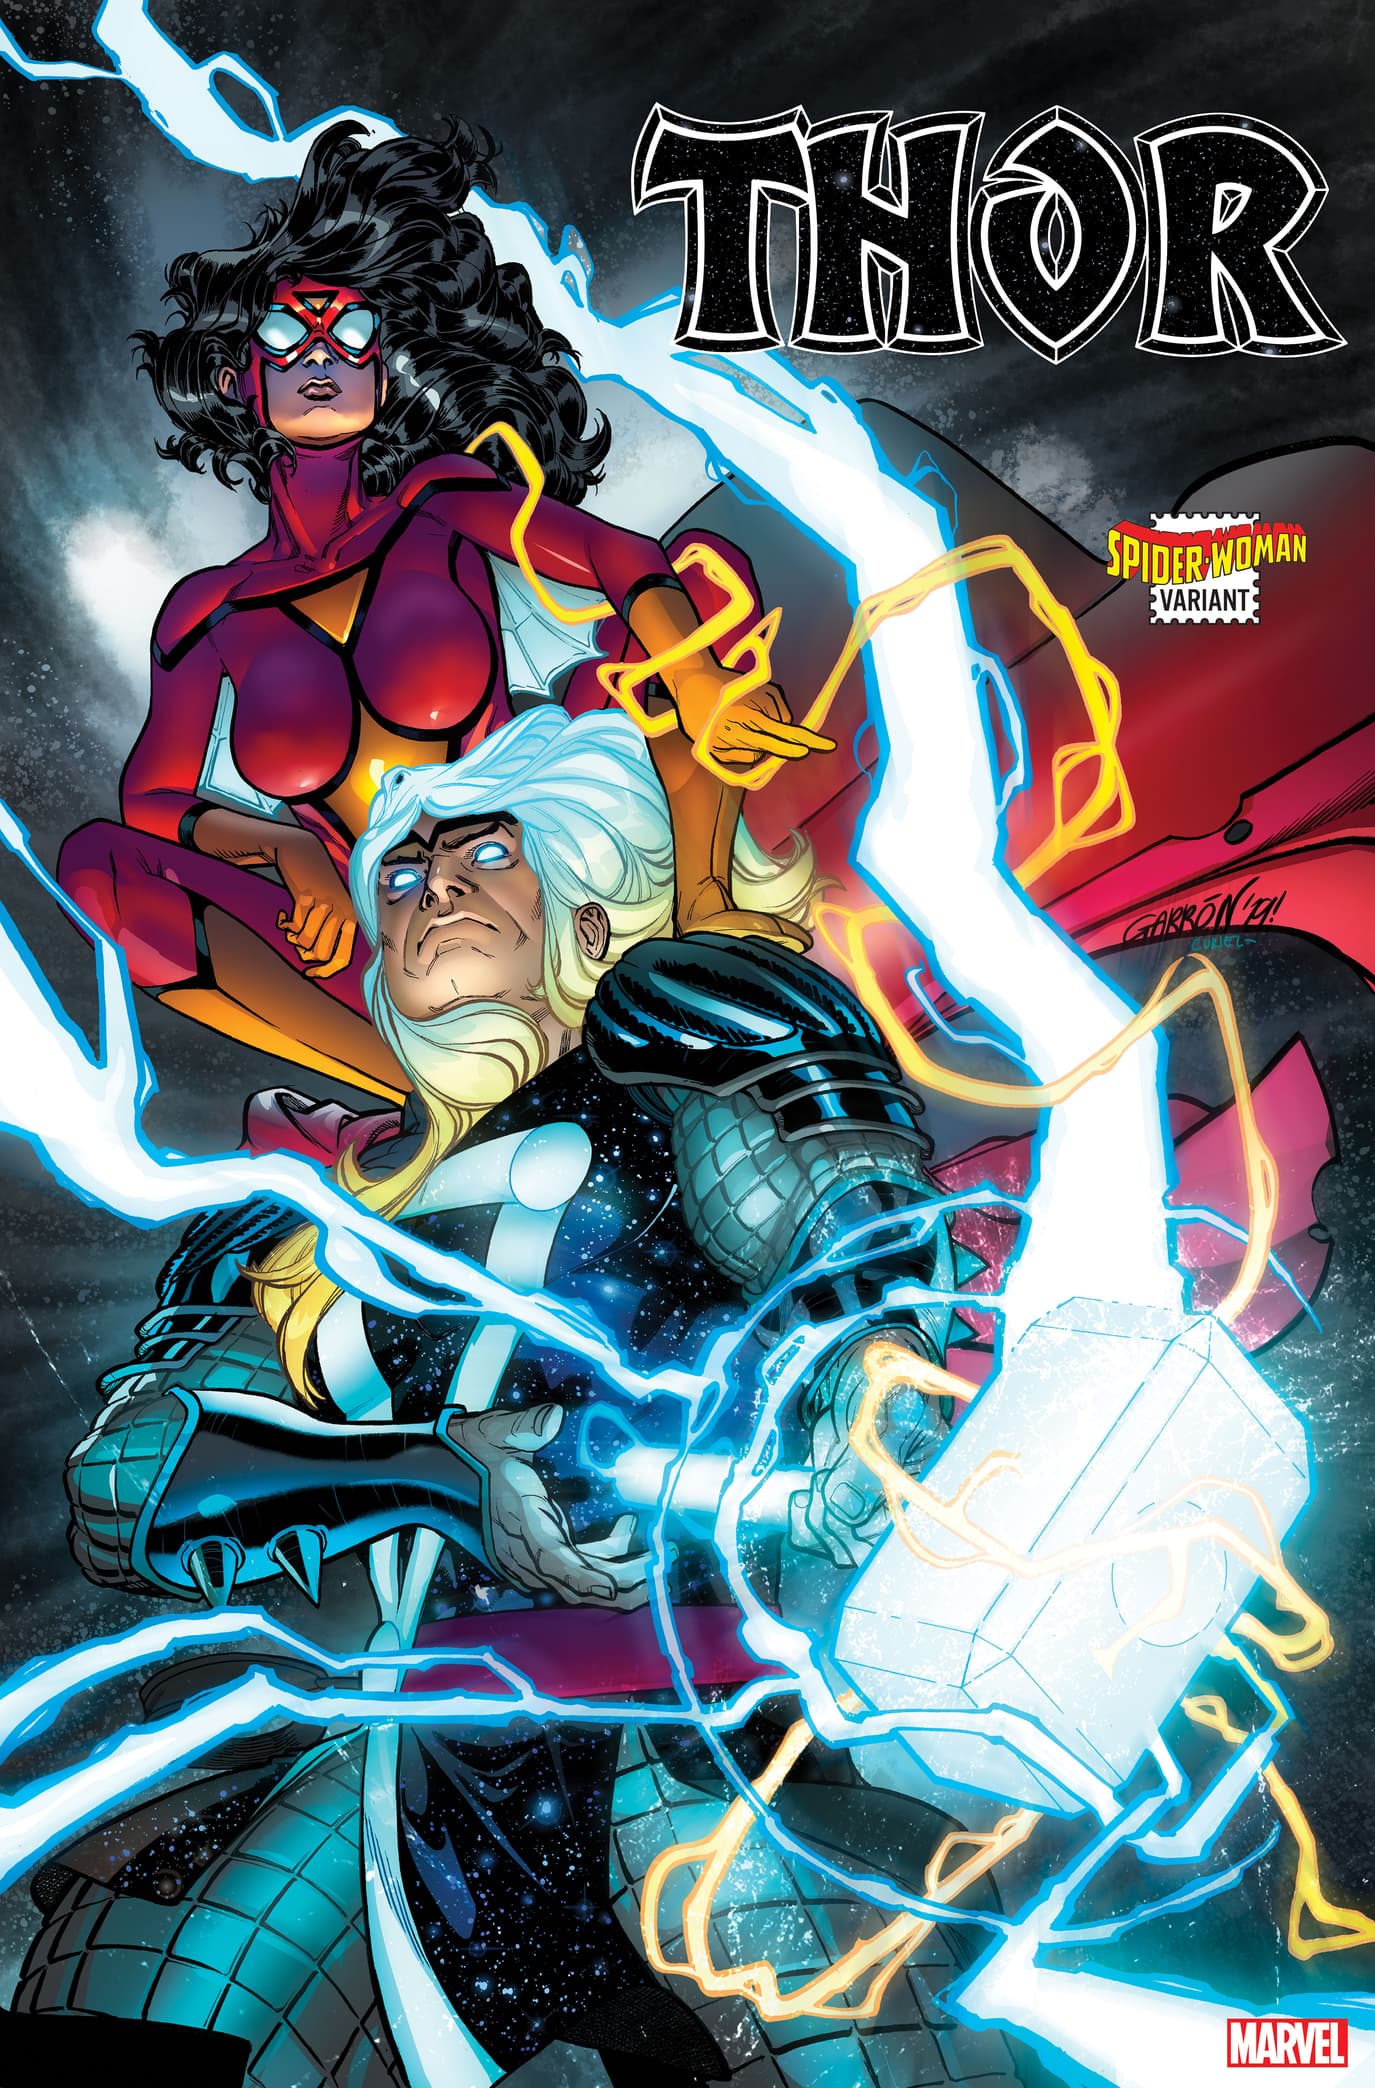 THOR #4 SPIDER-WOMAN VARIANT by JAVIER GARRÓN with colors by DAVID CURIEL